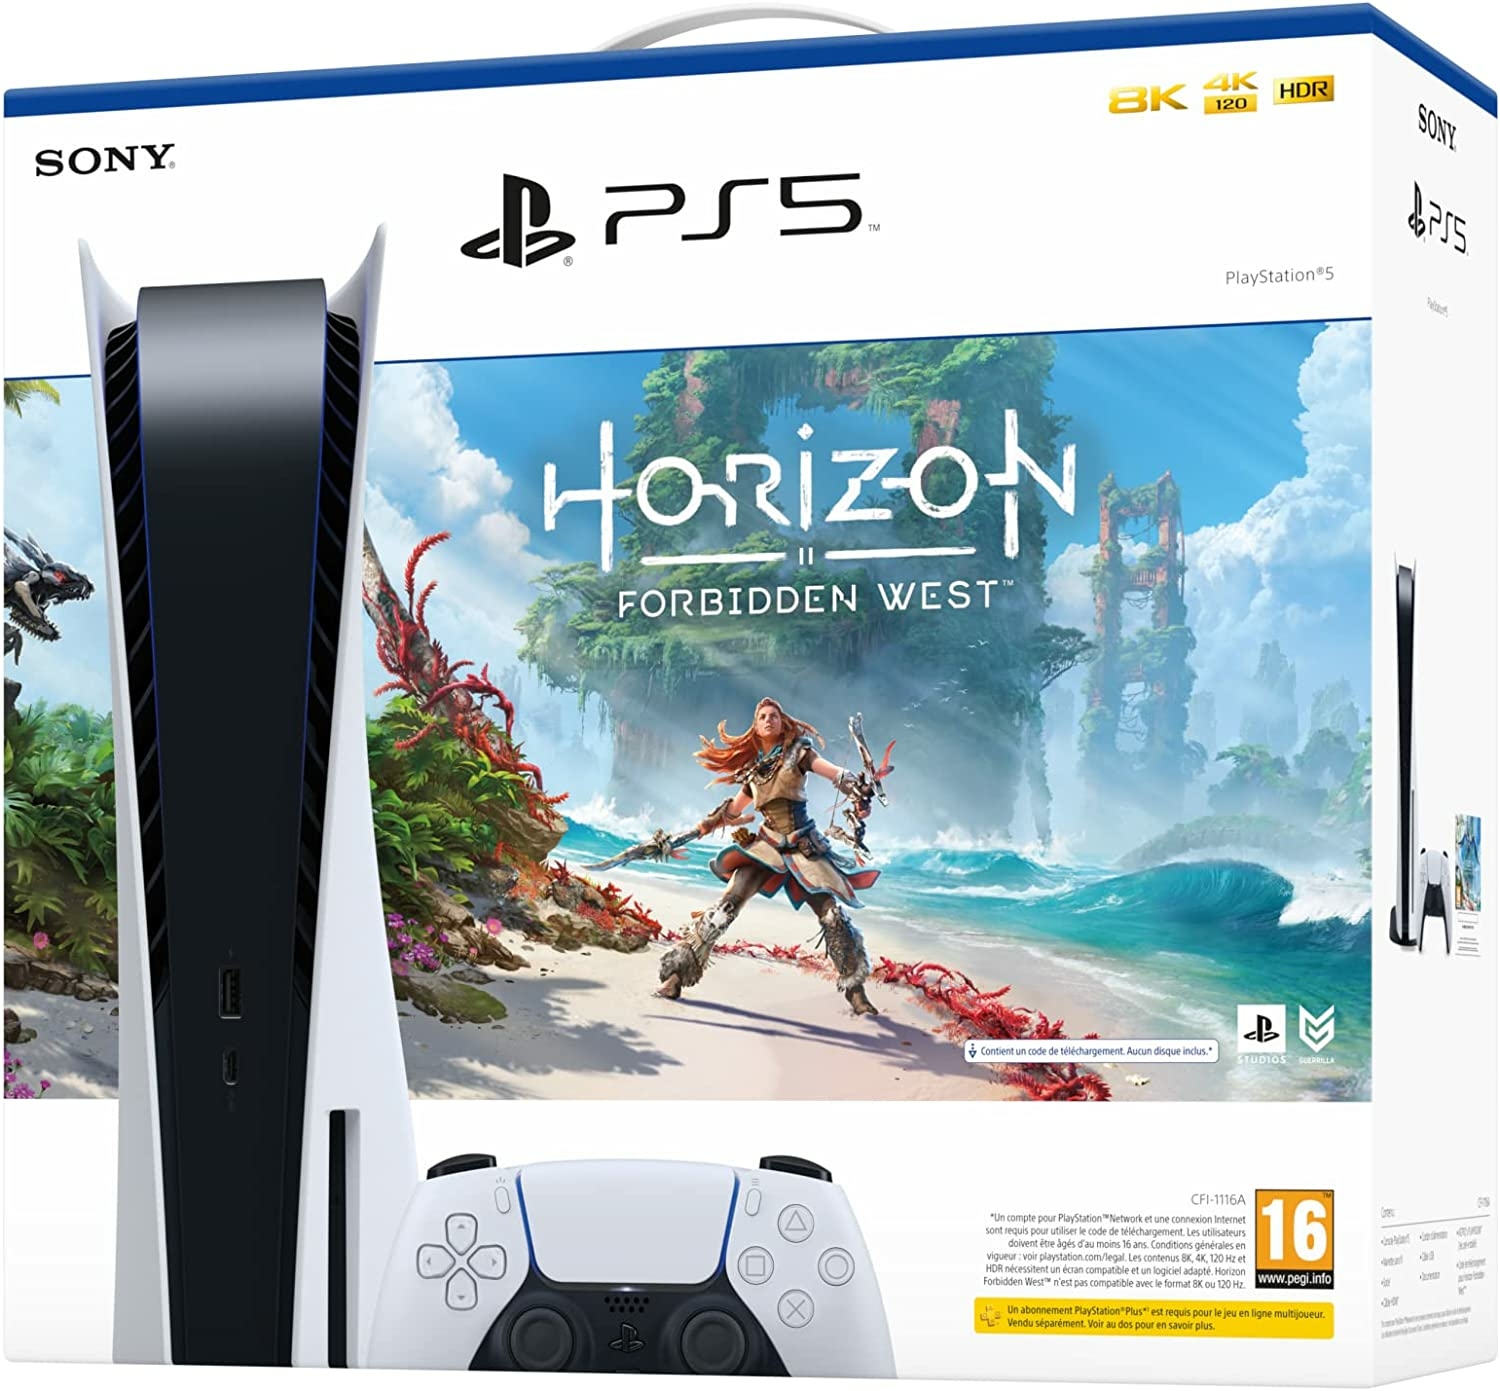 console-sony-playstation-5-standard-horizon-forbidden-west-ps5.jpg?format=product-cover-large&k=1656051569